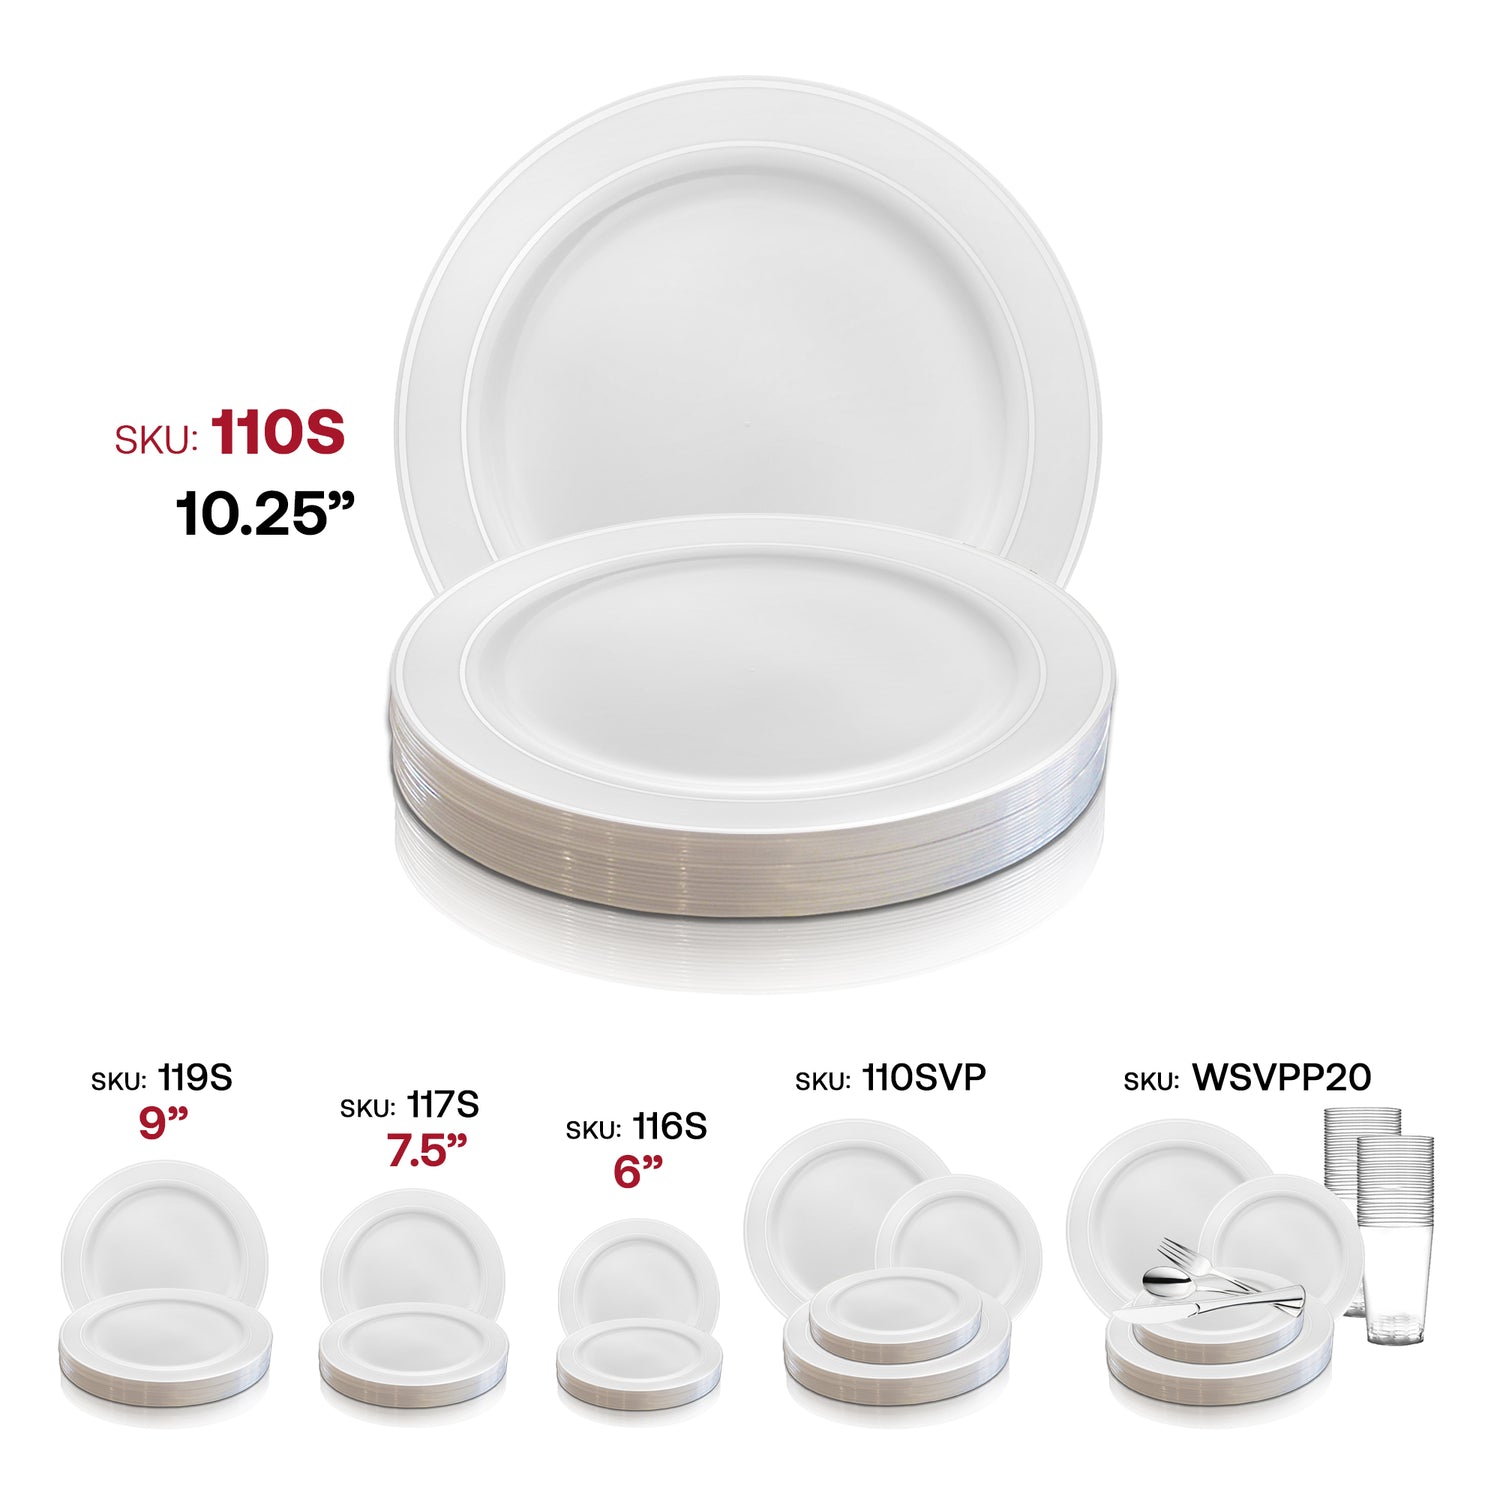 White with Silver Edge Rim Plastic Dinner Plates (10.25") SKU | The Kaya Collection